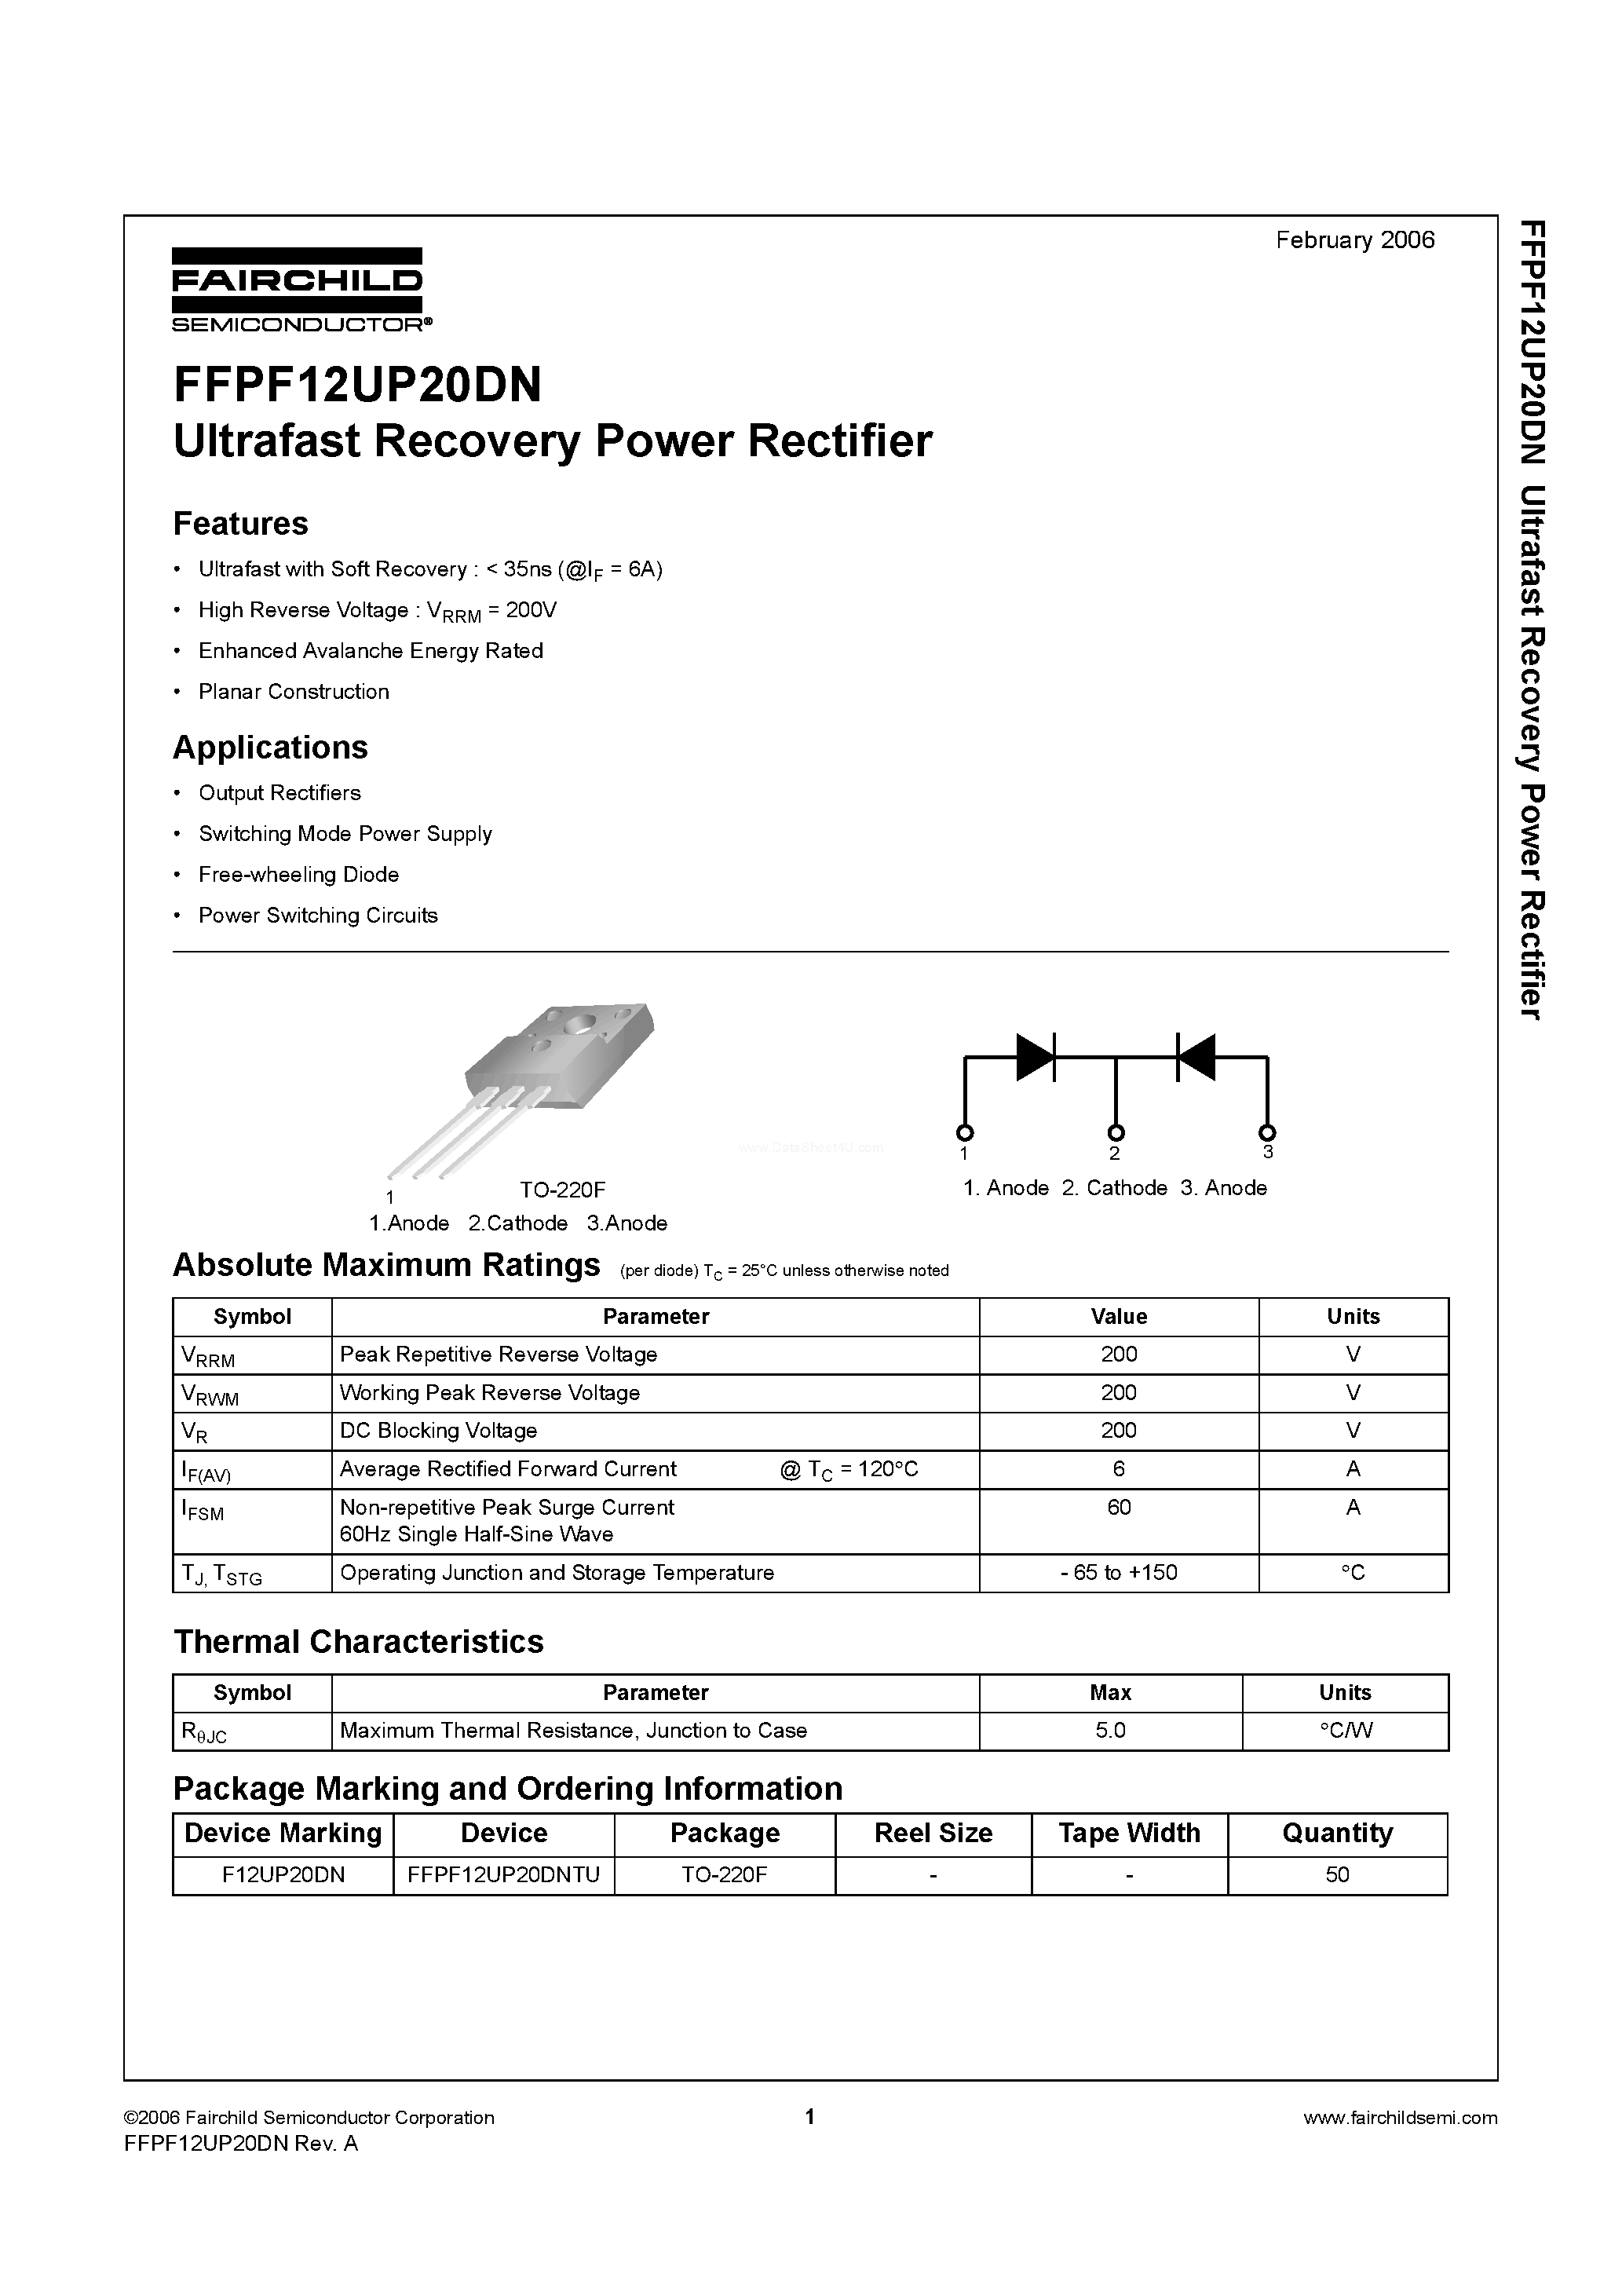 Datasheet FFPF12UP20DN - Ultrafast Recovery Power Rectifier page 1